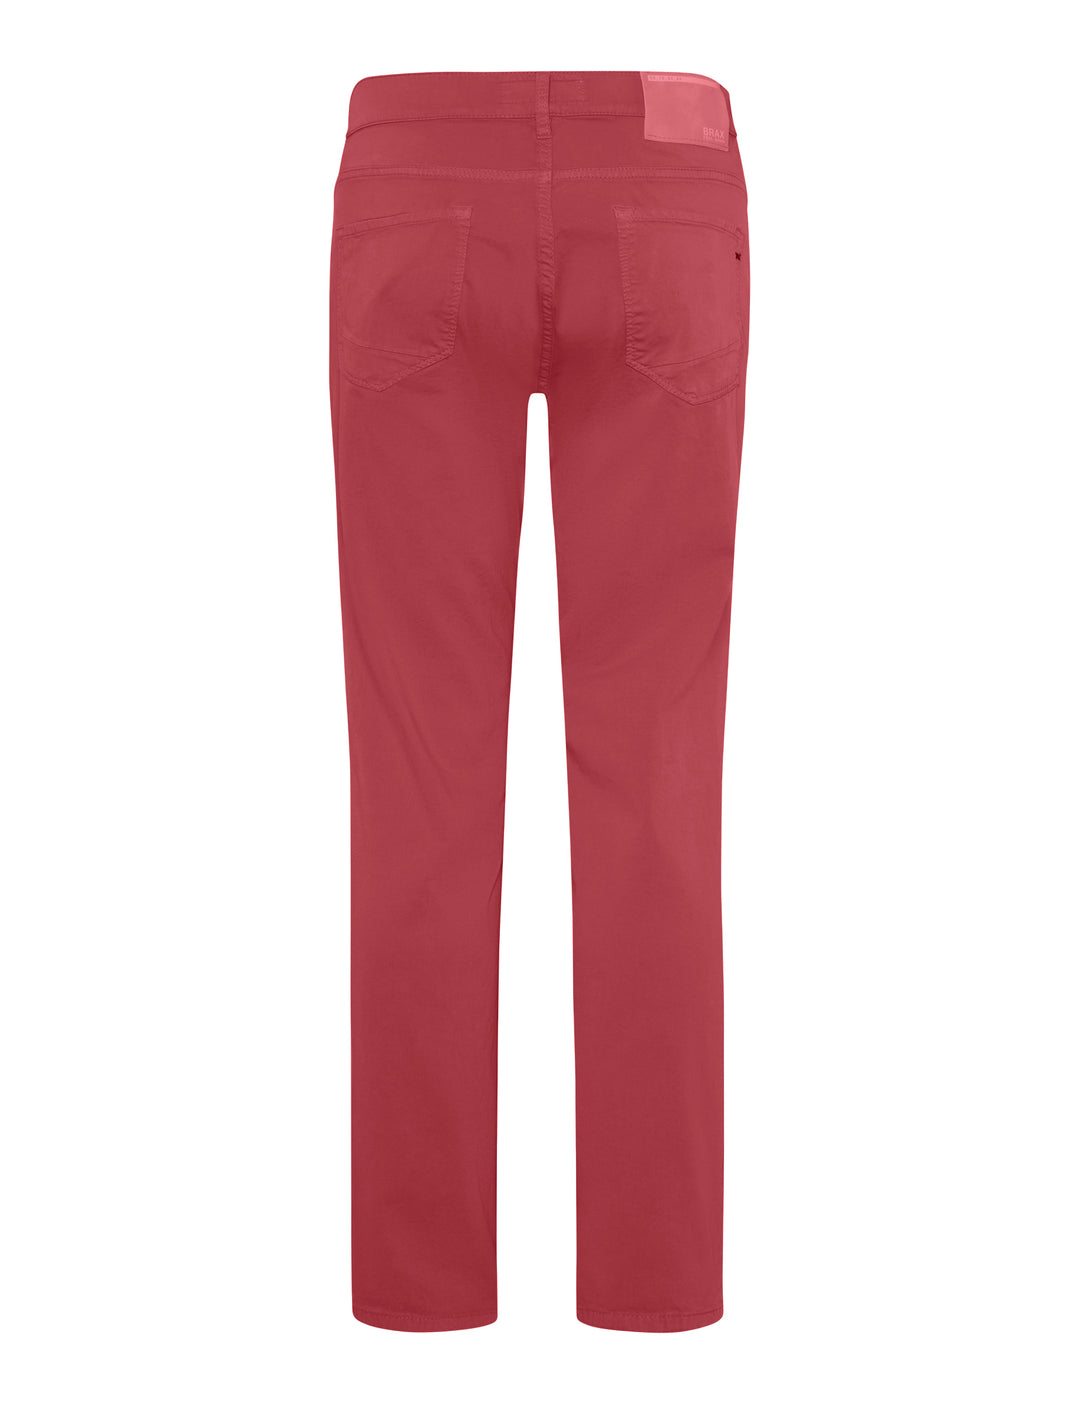 84-3058 Chuck Modern Fit Five Pocket in Indian Red